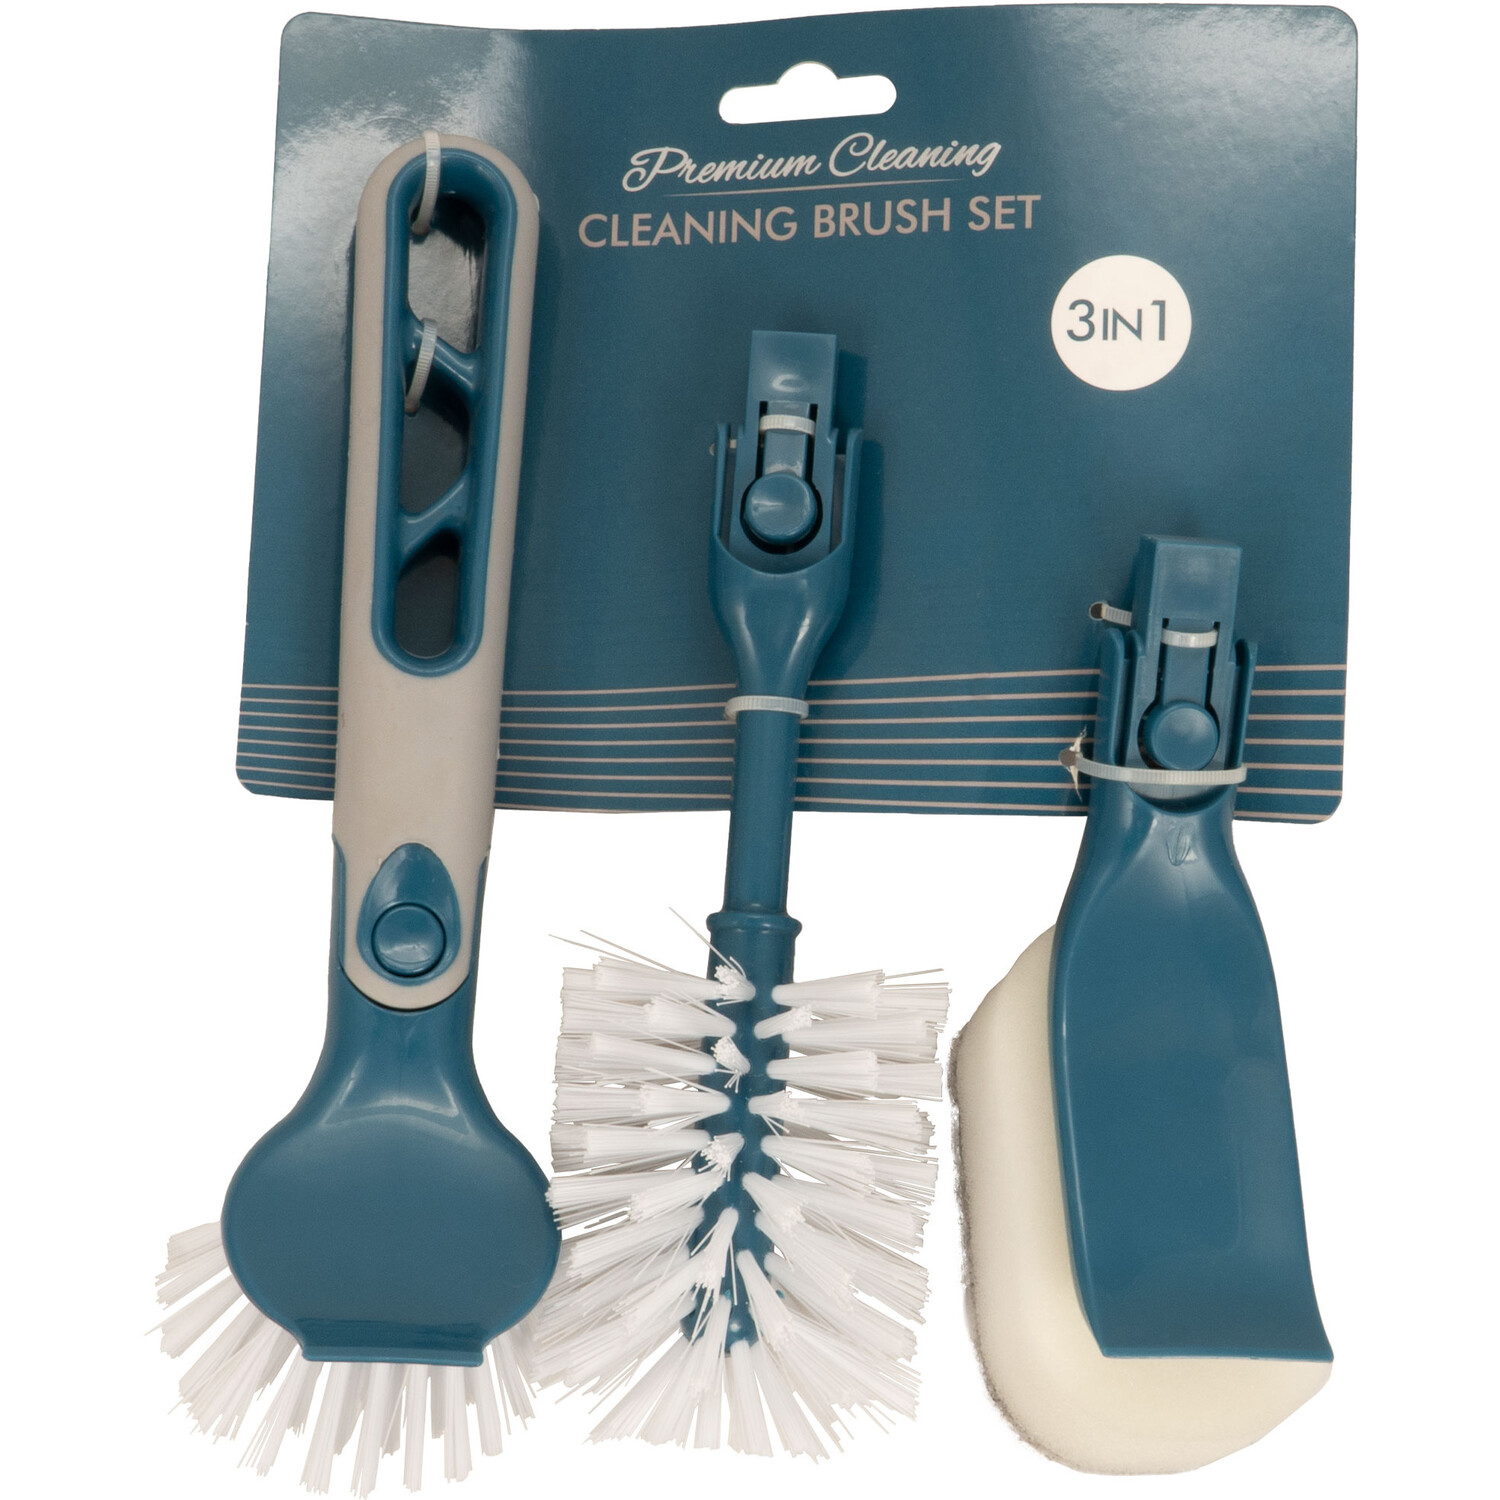 3 in 1 Cleaning Brush Set - Blue Image 1